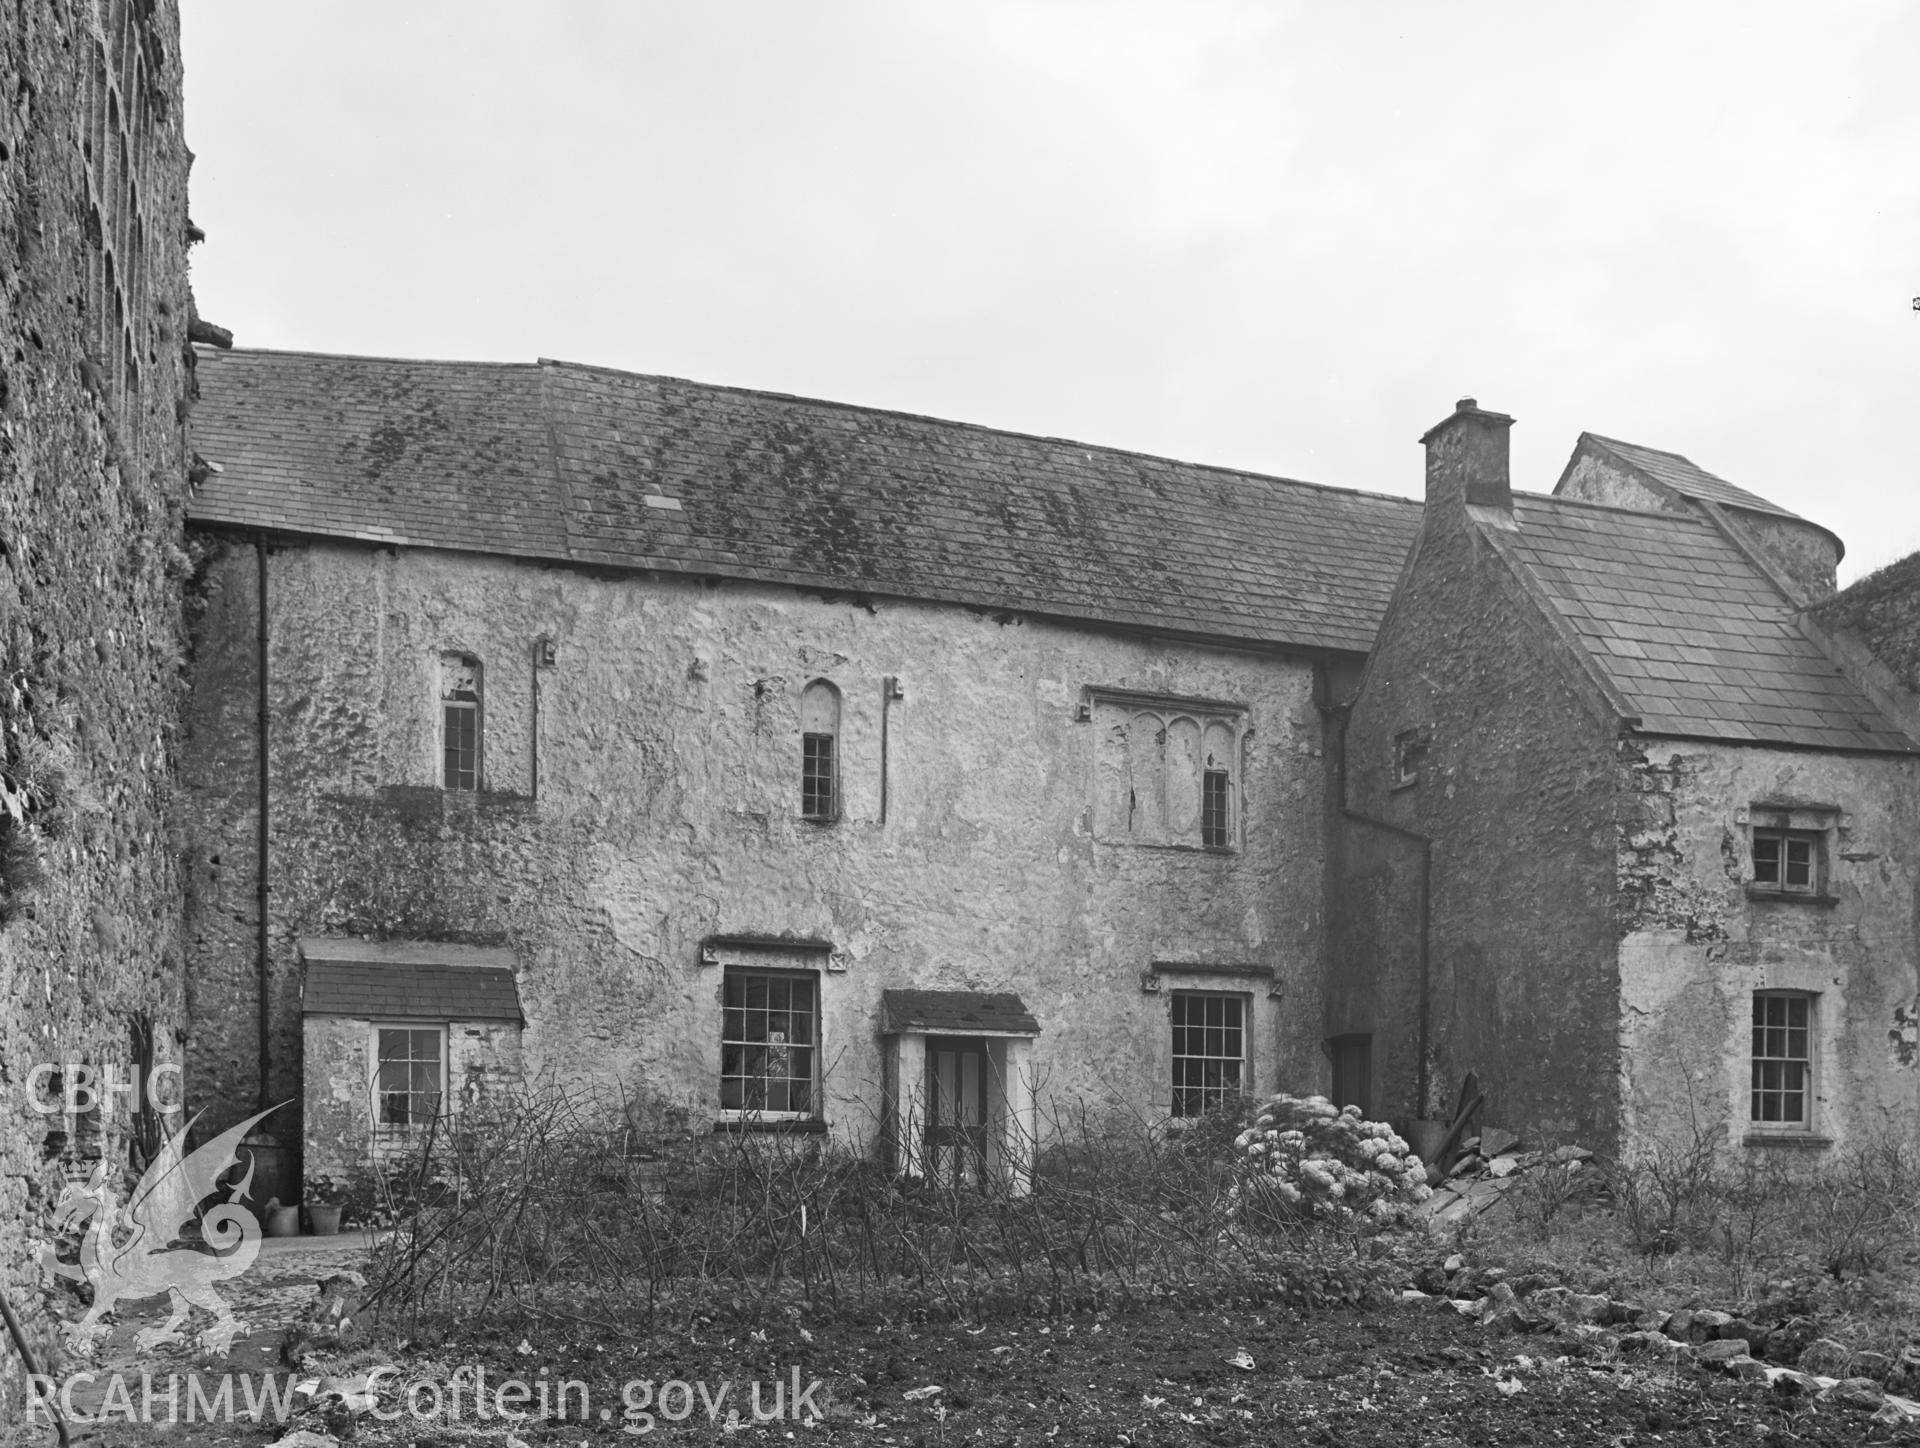 Digital copy of a nitrate negative showing view of Oxwich Castle, dated 1948.